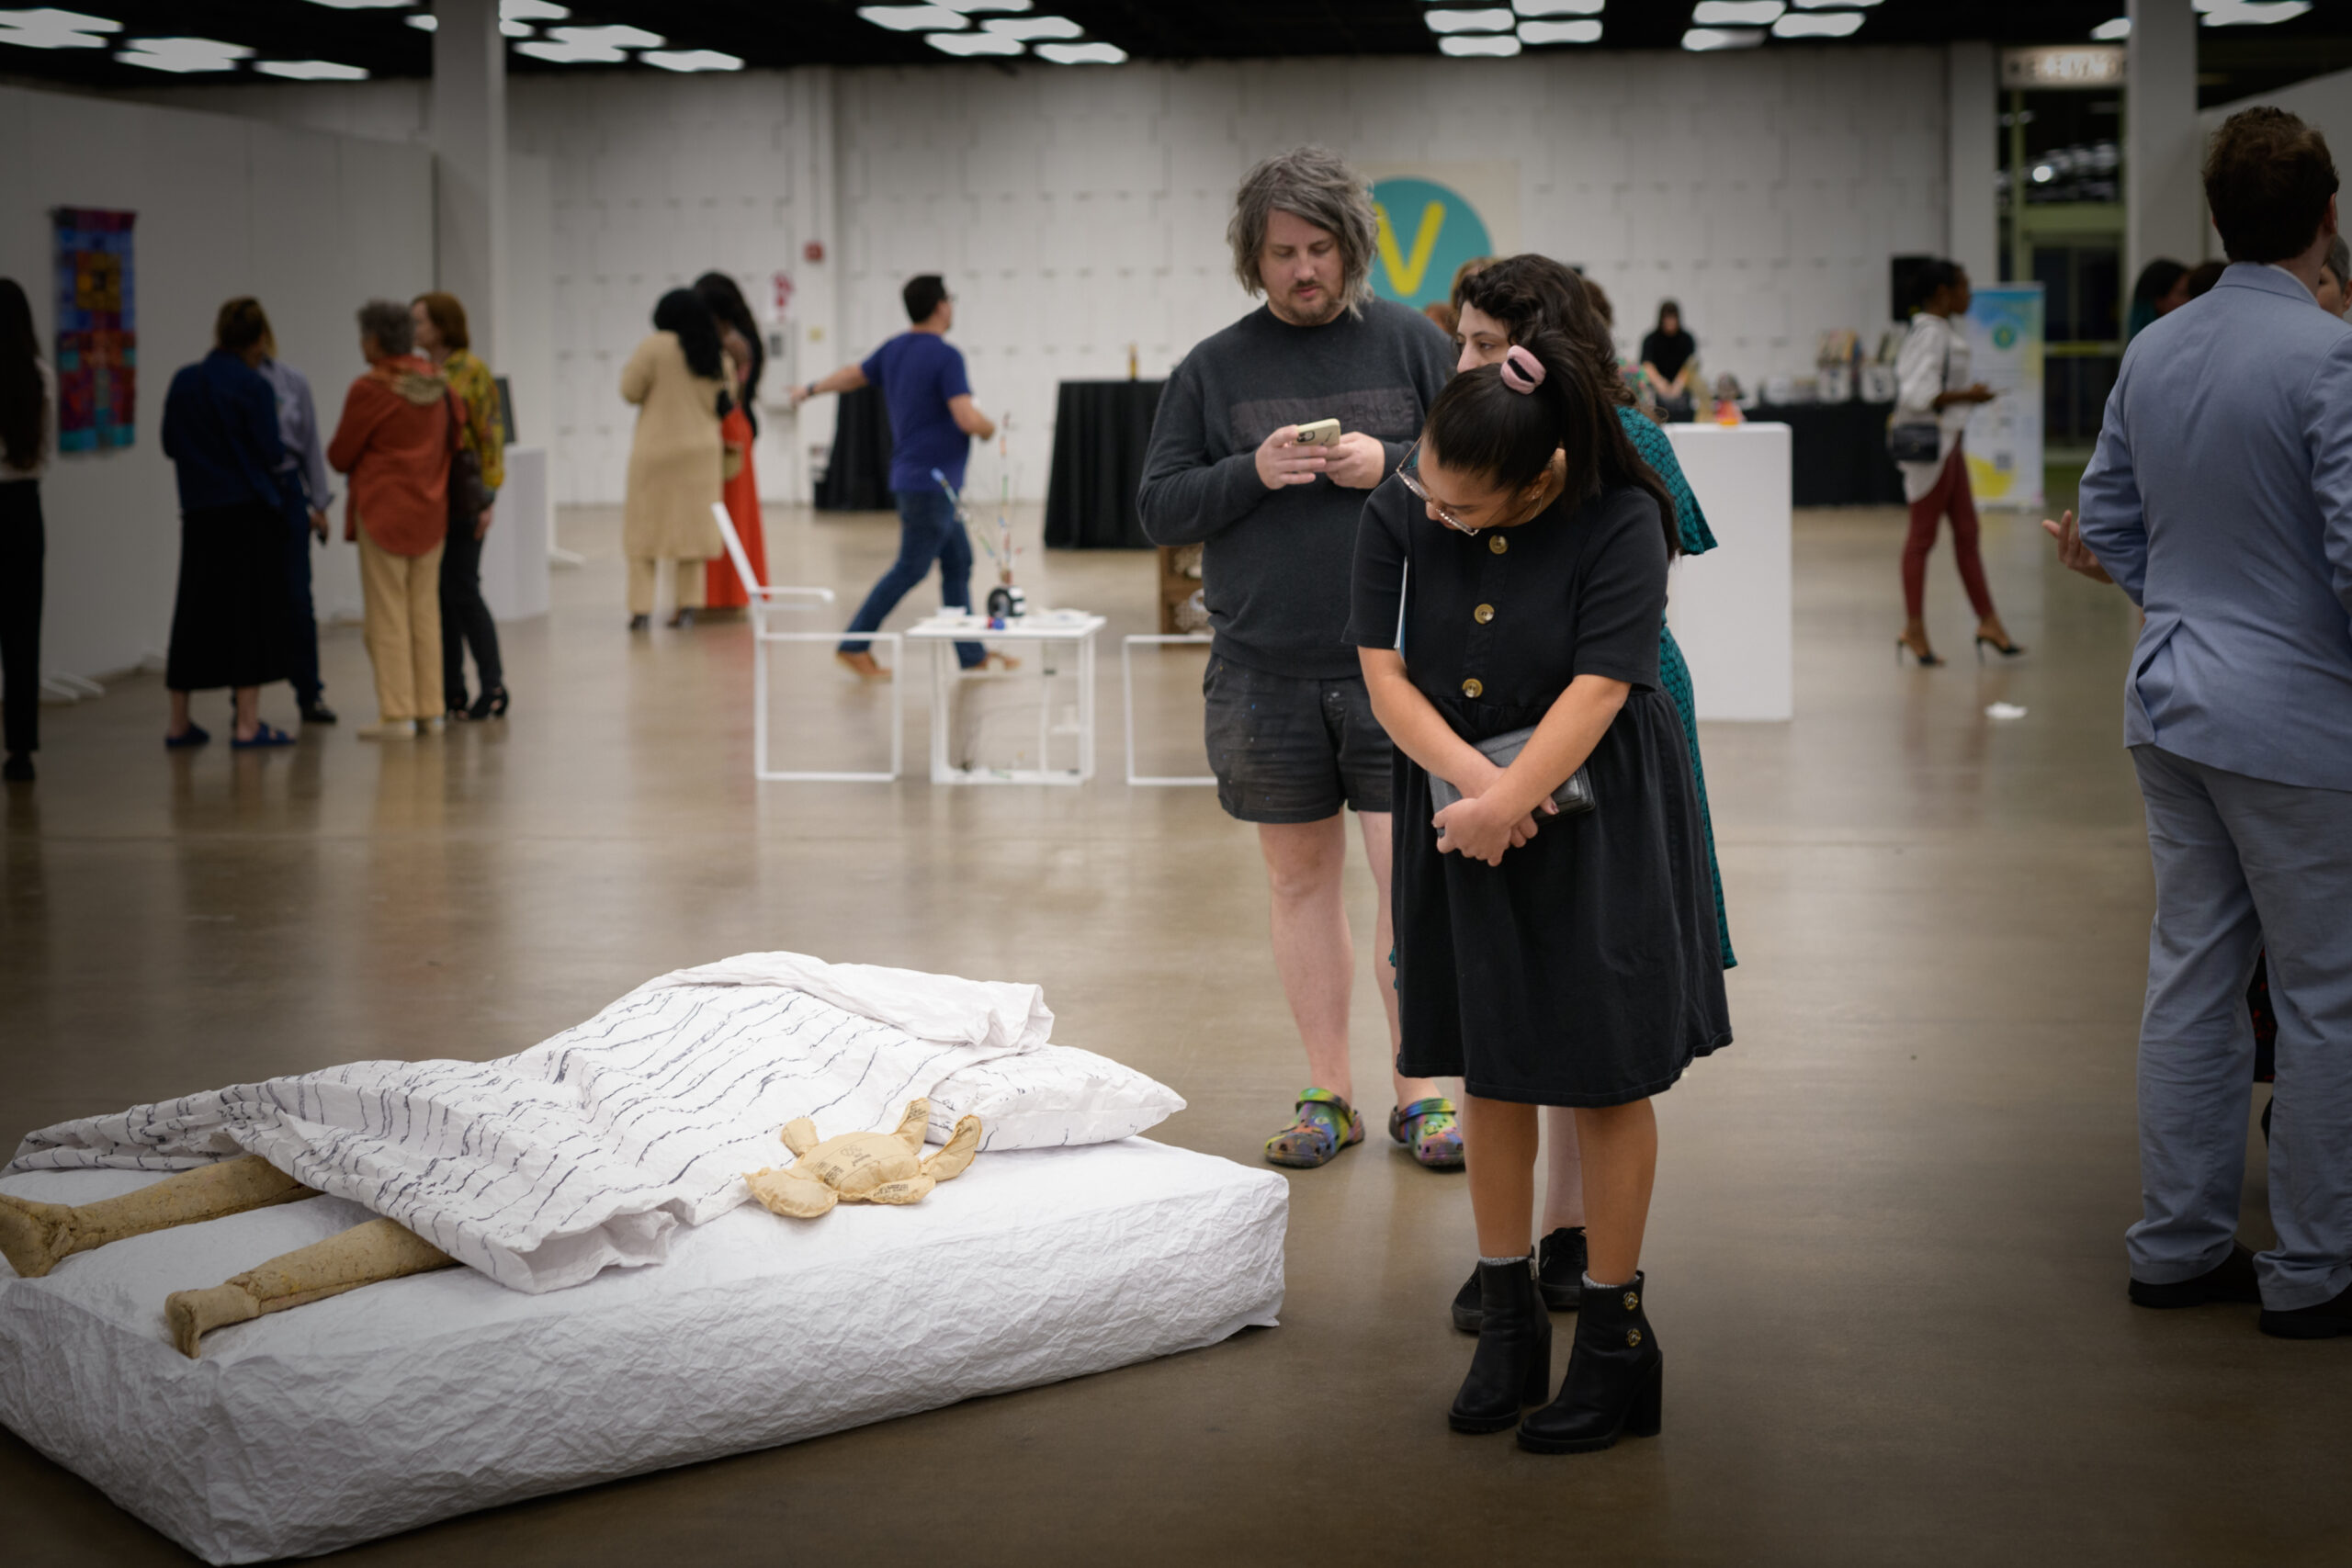 Texas Vignette a woman in a black dress and black shoes leans over to examine a sculpture of a wooden mannequin on a mattress